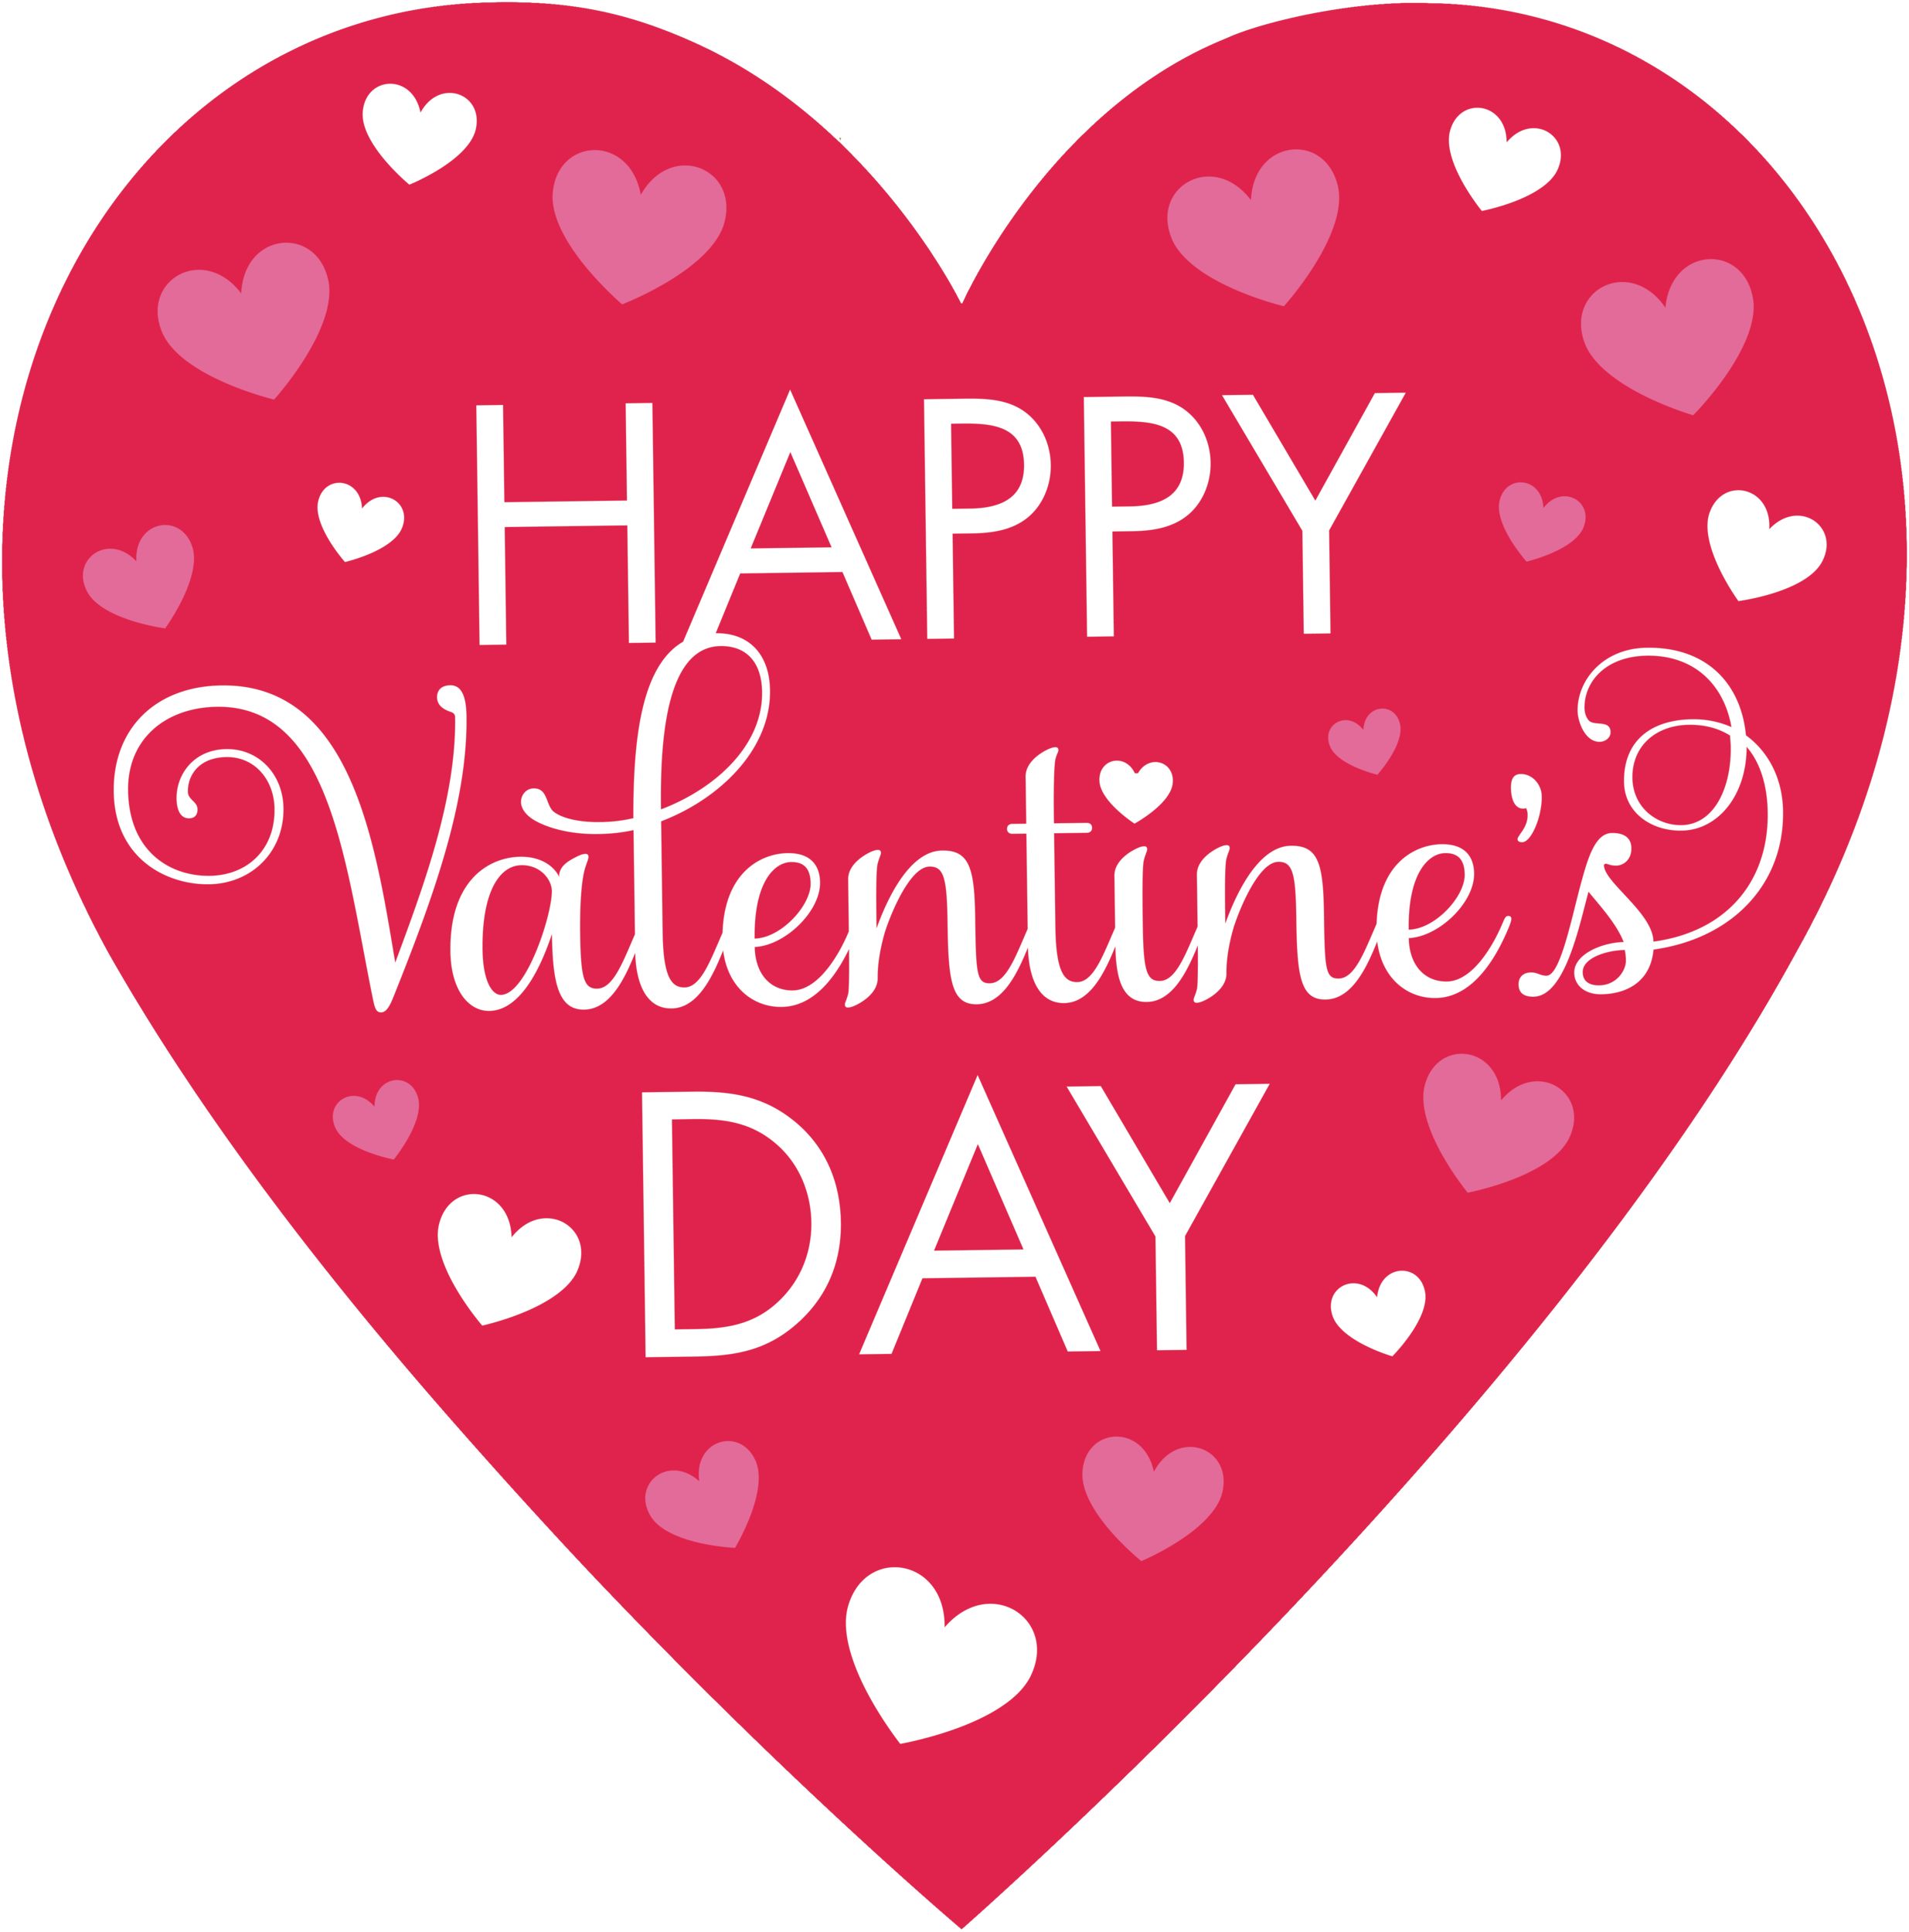 Happy Valentine's Day Cut-out